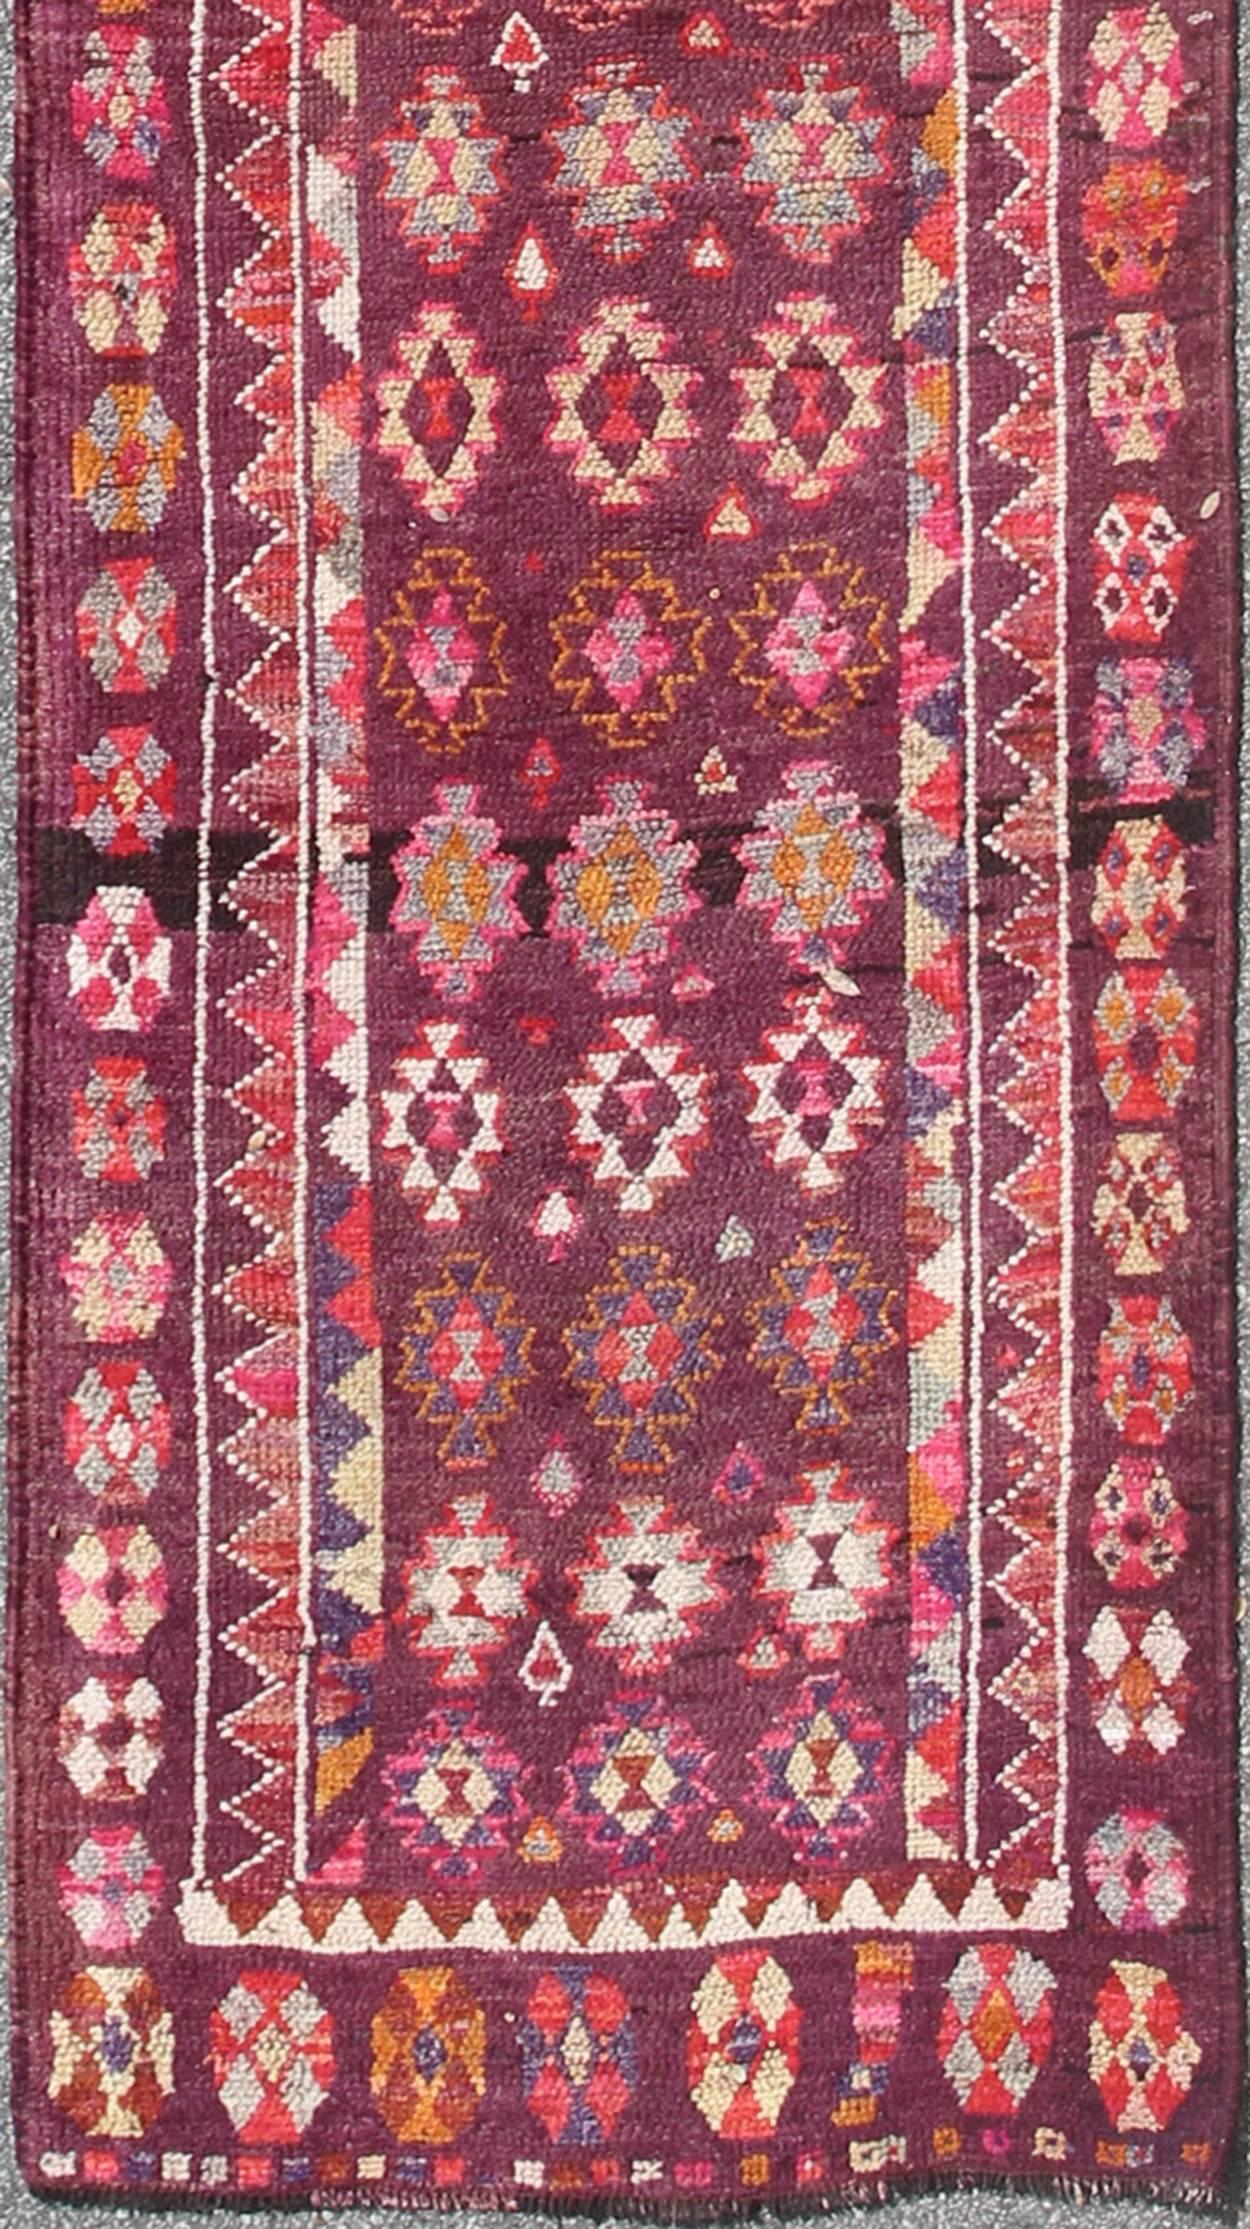  colorful vintage Turkish Oushak runner with geometric design, rug en-165655, country of origin / type: Turkey / Oushak, circa 1950

This vintage Oushak runner (circa mid-20th century) features a unique blend of colors and an intricately beautiful